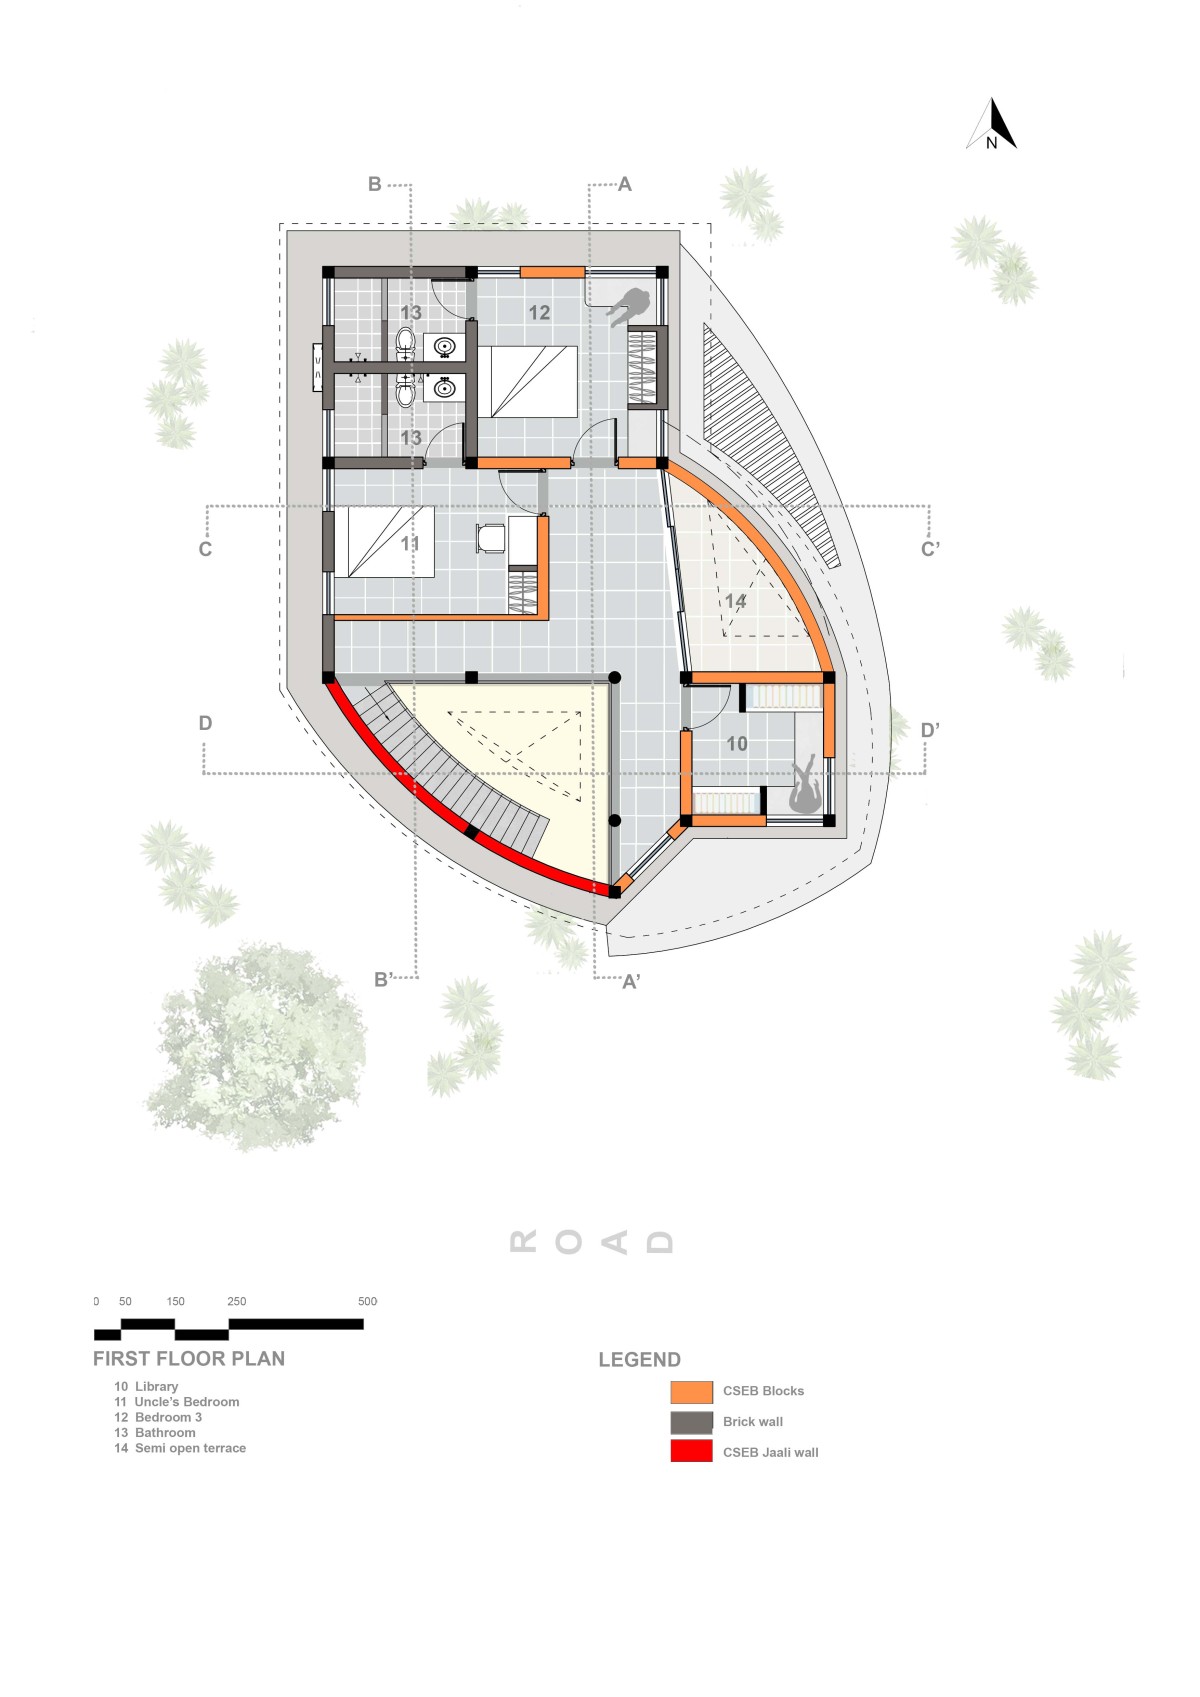 First Floor Plan of Aadhi Residence by RP Architects